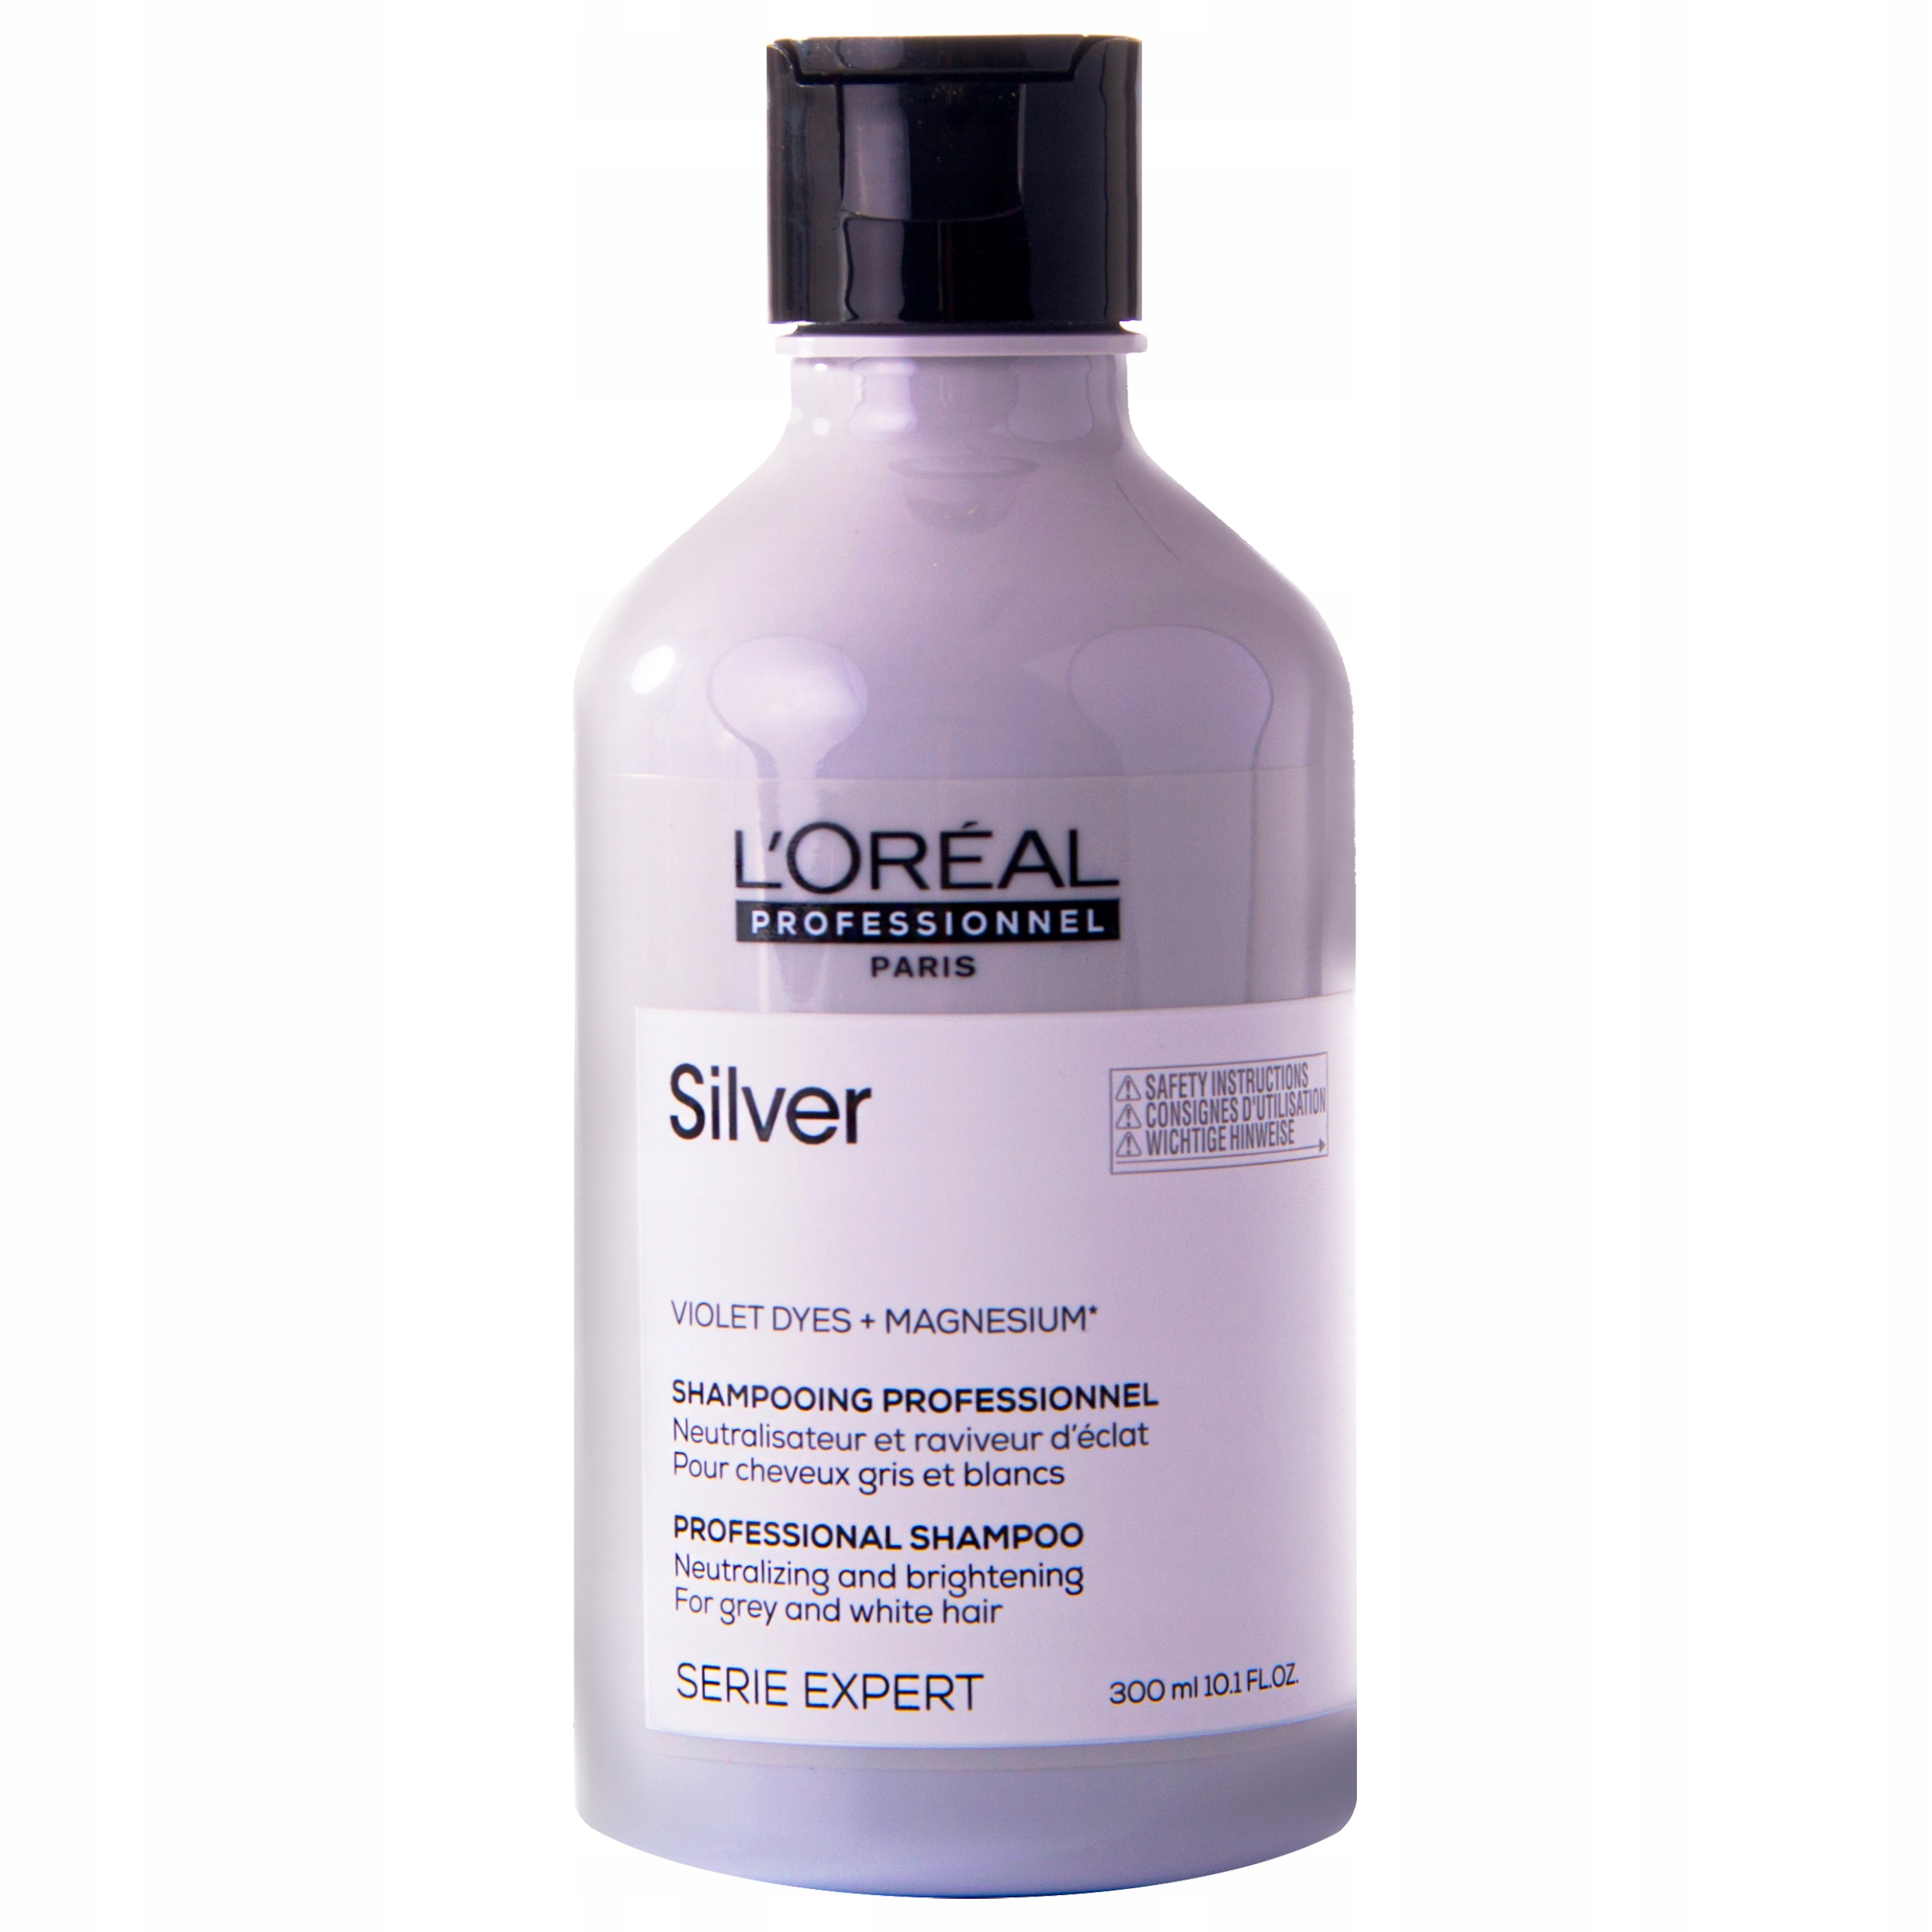 loreal fioletowy szampon